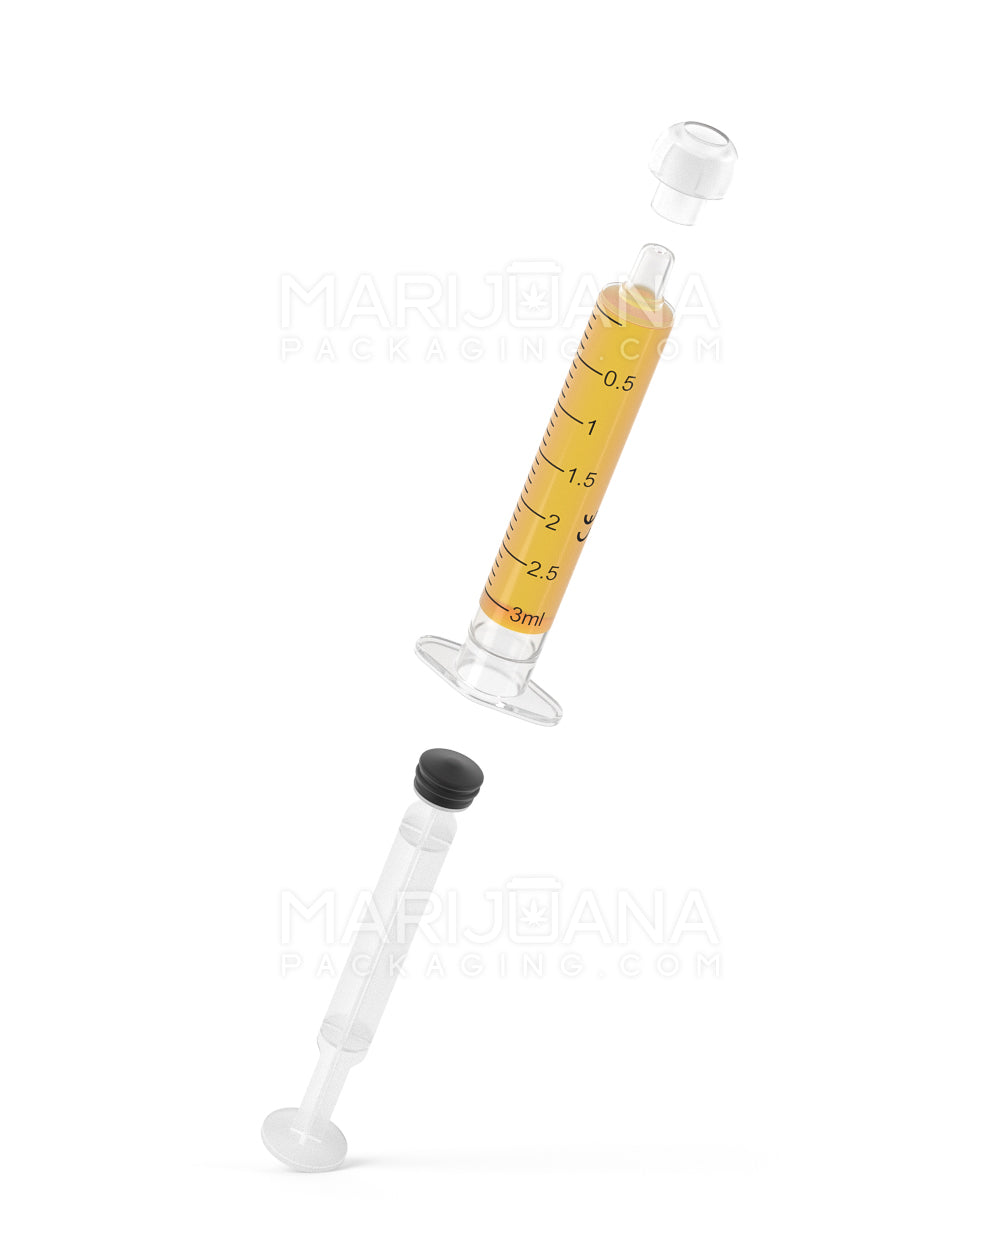 Plastic Oral Concentrate Syringes | 3mL - 0.5mL Increments - 100 Count - 7